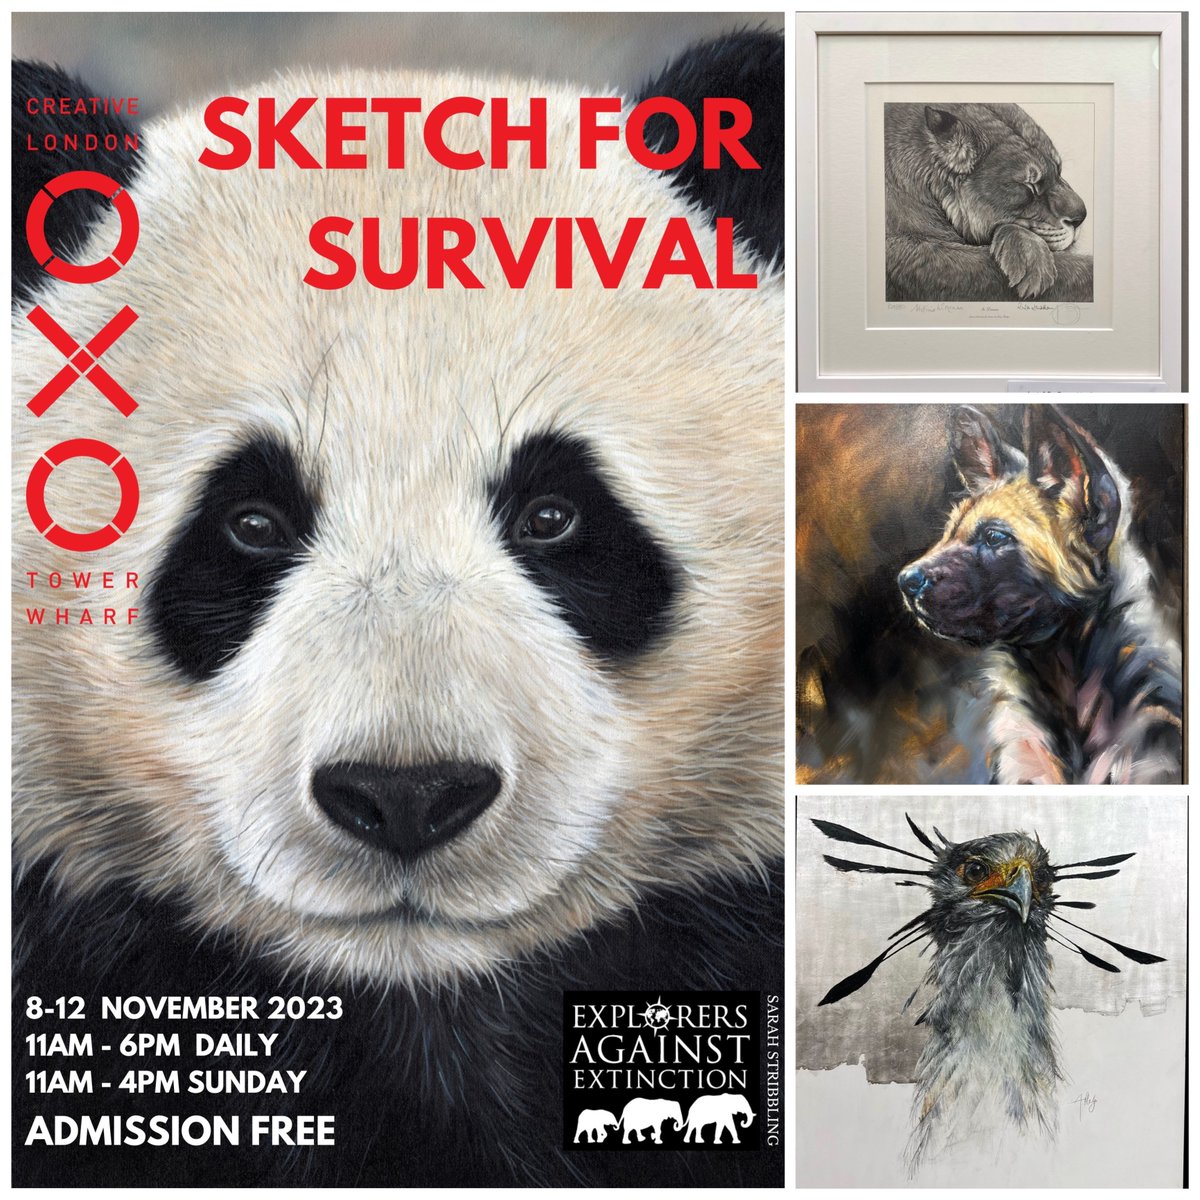 Annual charity fundraising art/image auction featuring established artists & amateurs is now open! Ends 12 Nov. …plorersagainstextinction.irostrum.com
Exhibitions in Edinburgh @DundasStGallery 26-29 Oct & London @OxoTowerWhrf 8-12 Nov.
#sketchforsurvival 
Please look/share/support if you can🙏